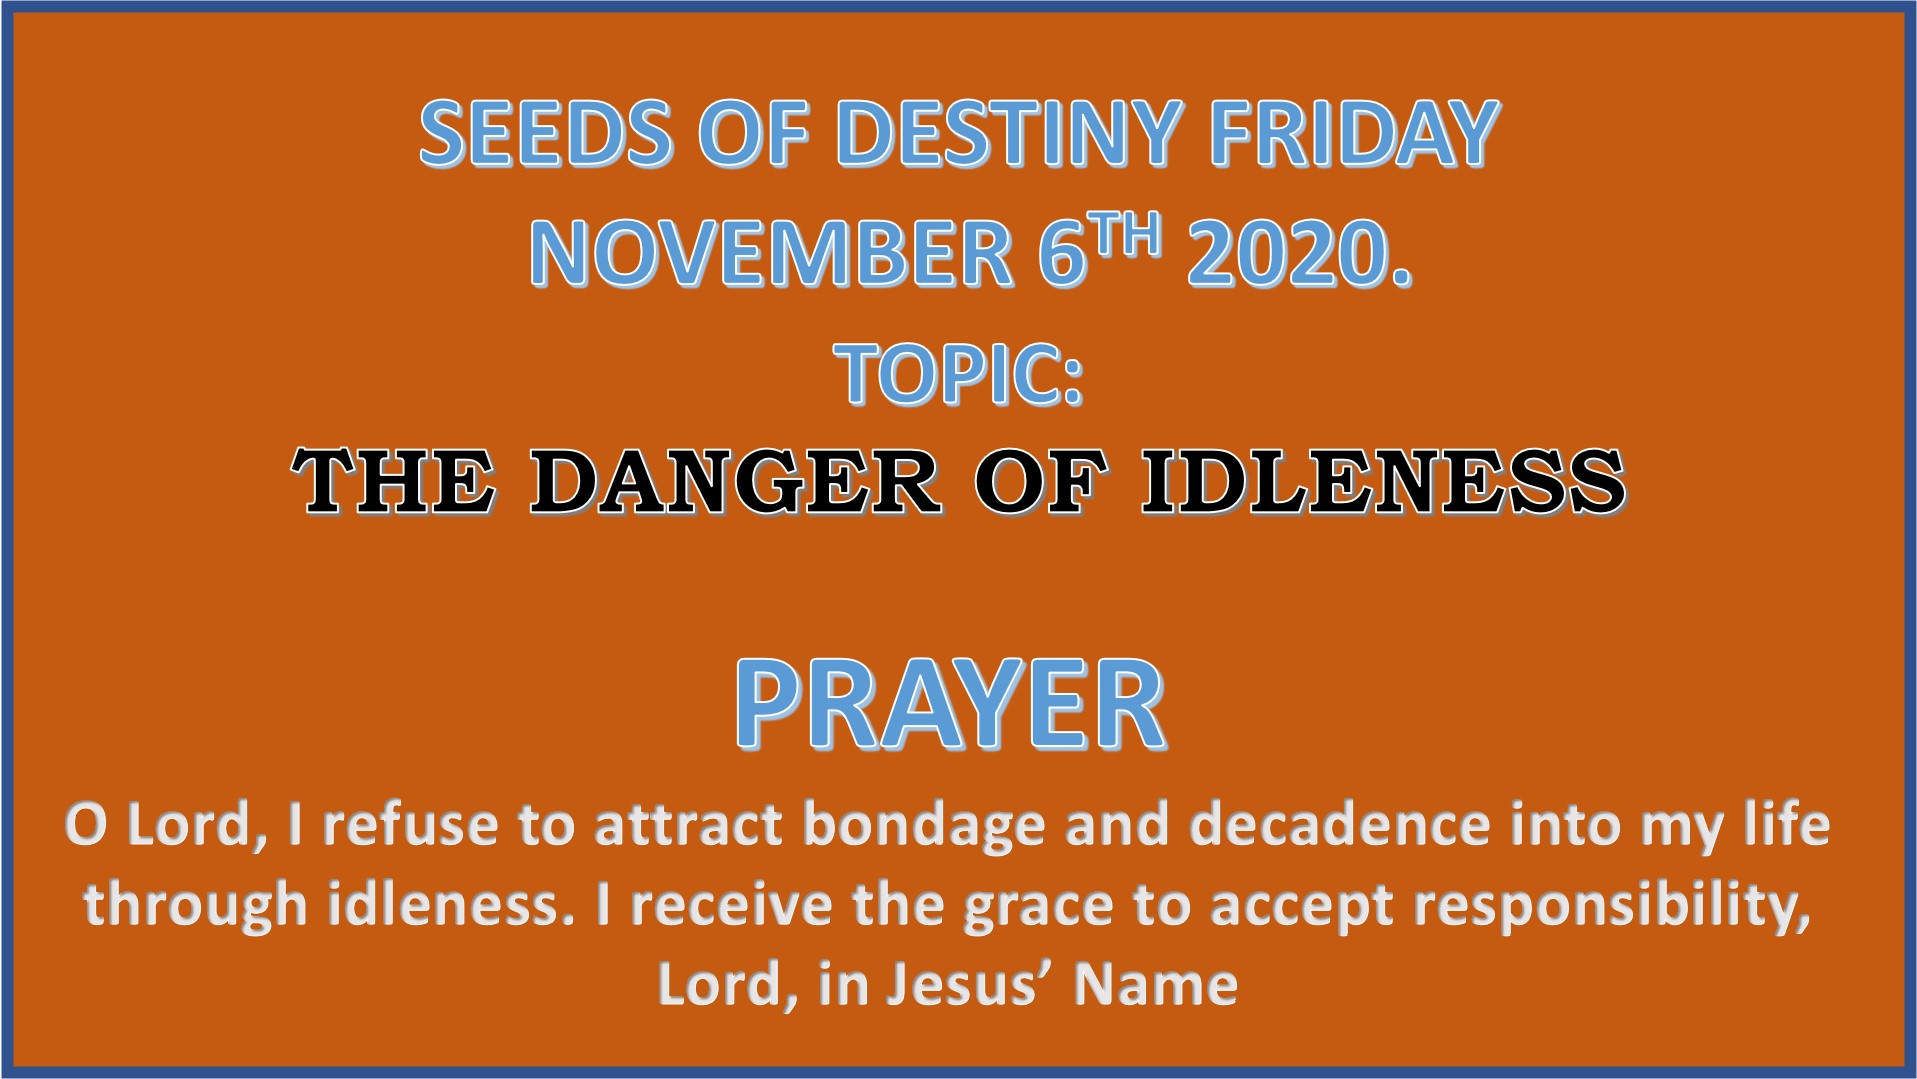 Seeds of Destiny Friday 6th November 2020 by Dr Paul Enenche